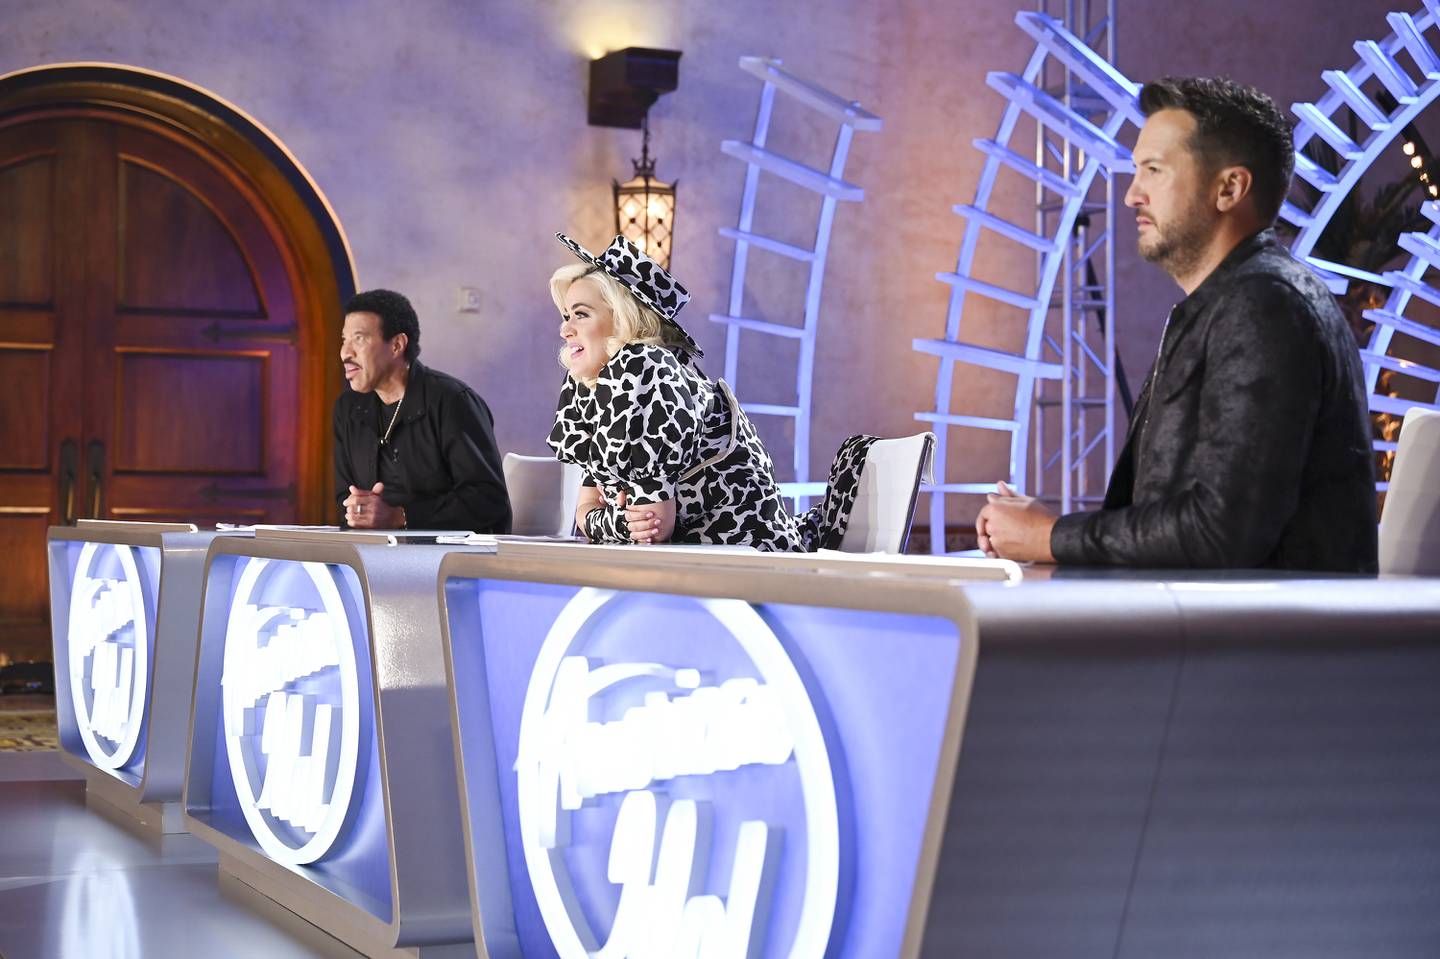 American Idol judges Lionel Richie, Katy Perry and Luke Bryan (from left to right) are seen on the show's season premiere on Sunday, Feb. 14, 2021.